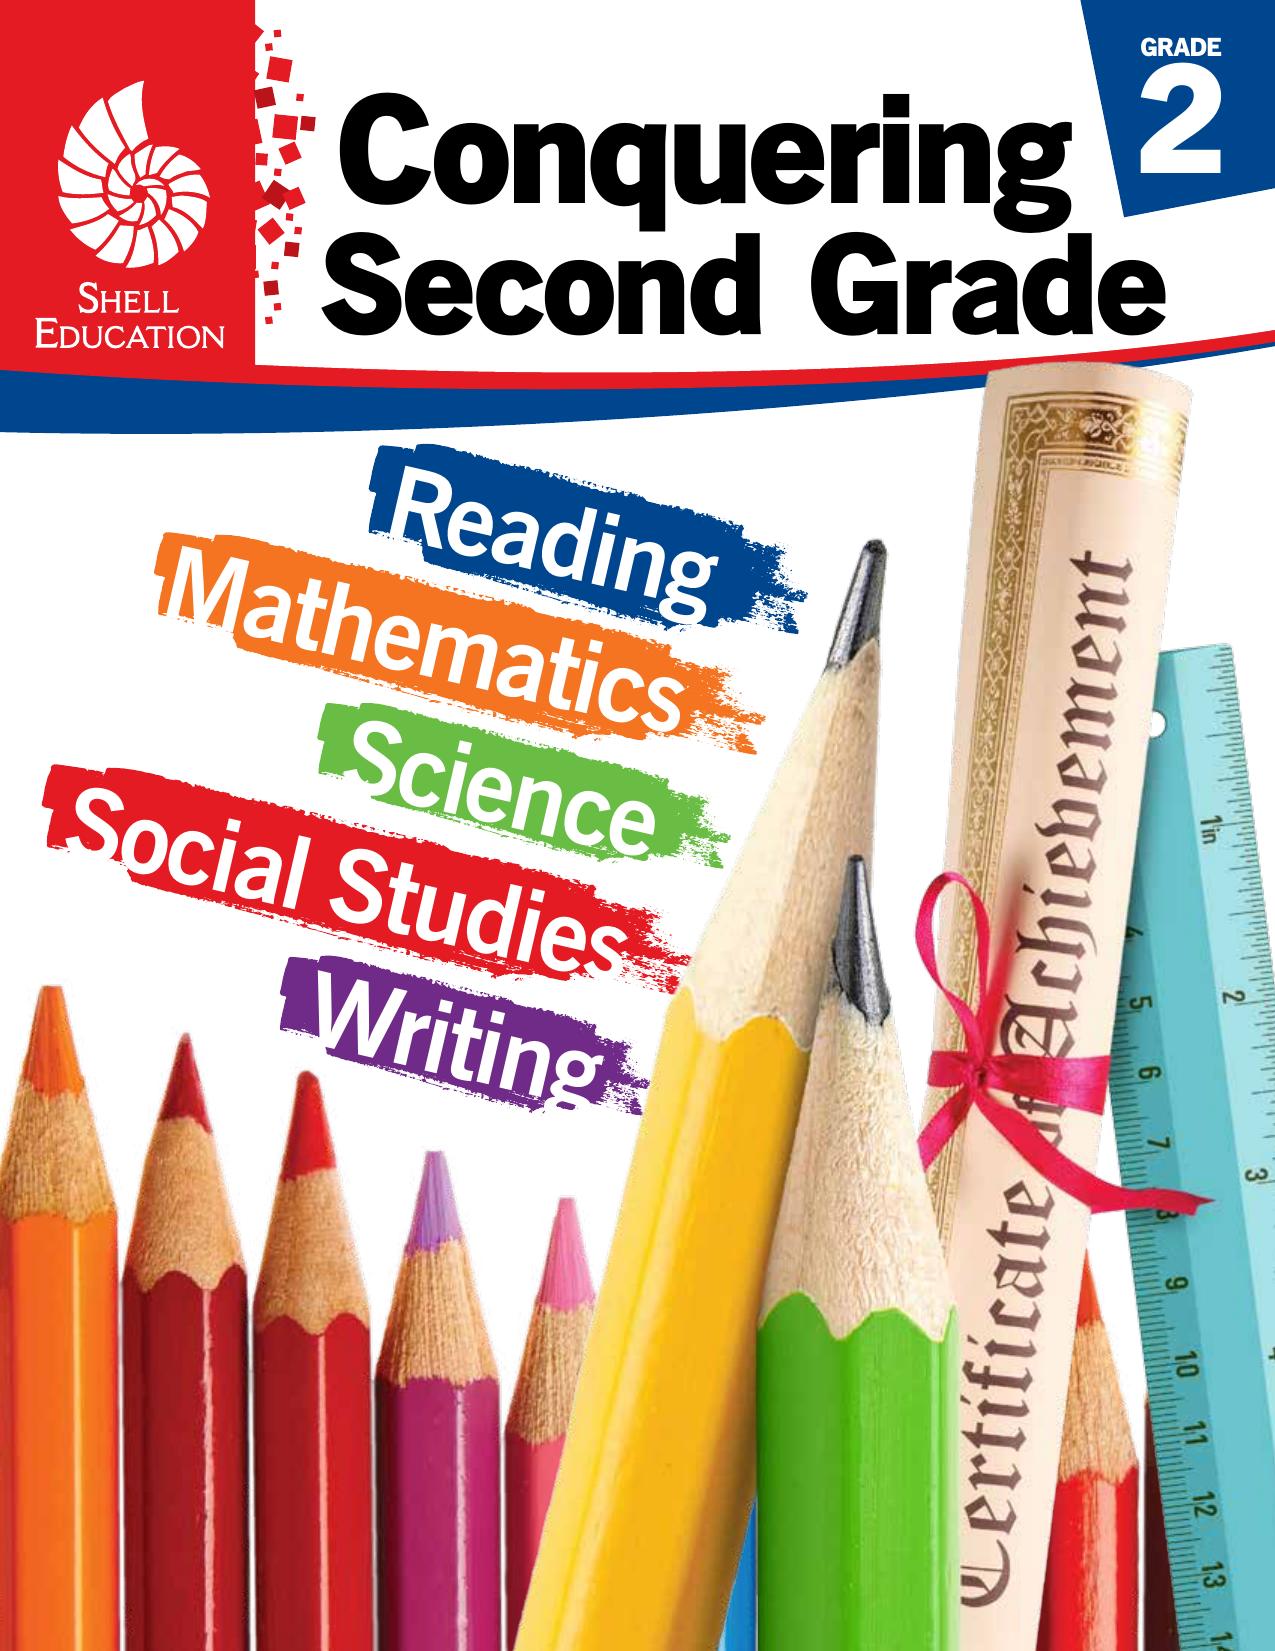 Conquering Second Grade by Kristy Stark